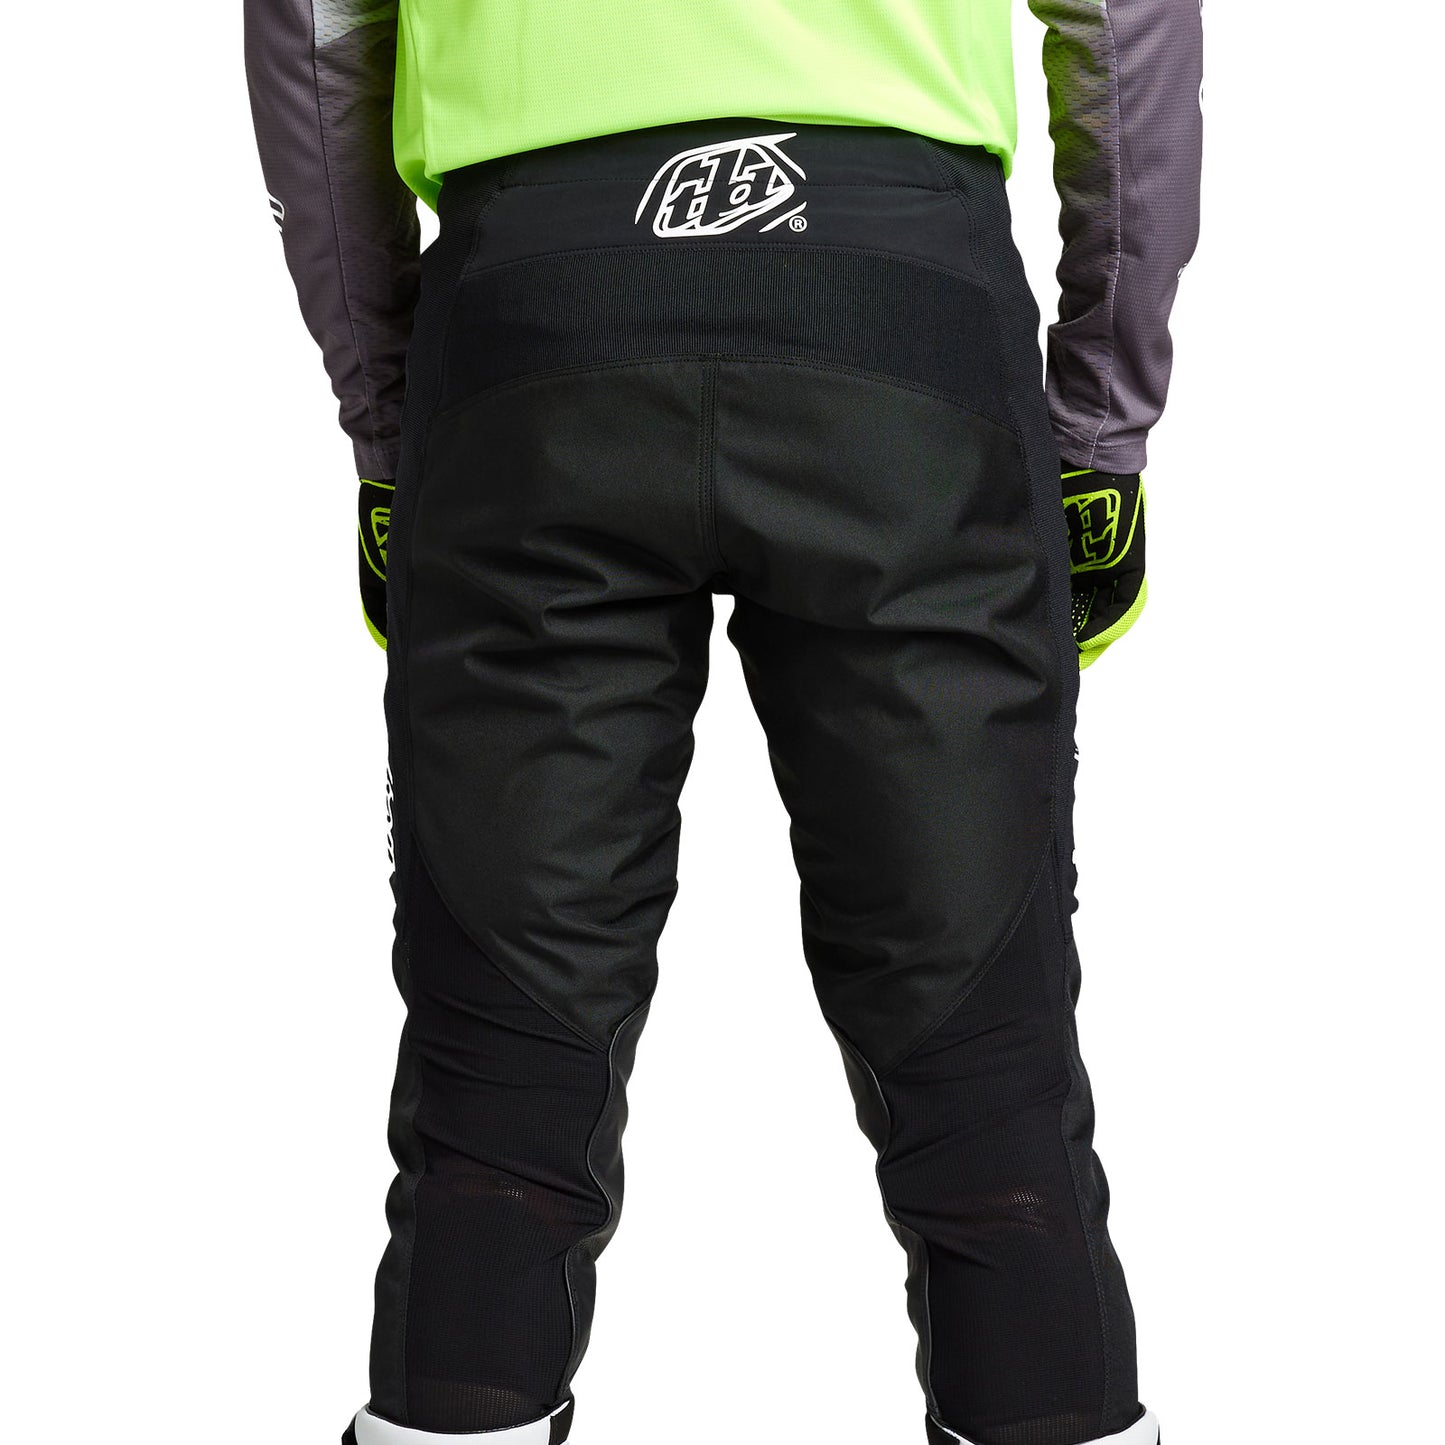 Bike pants TLD GP MONO with comfy fit and stretch fabric